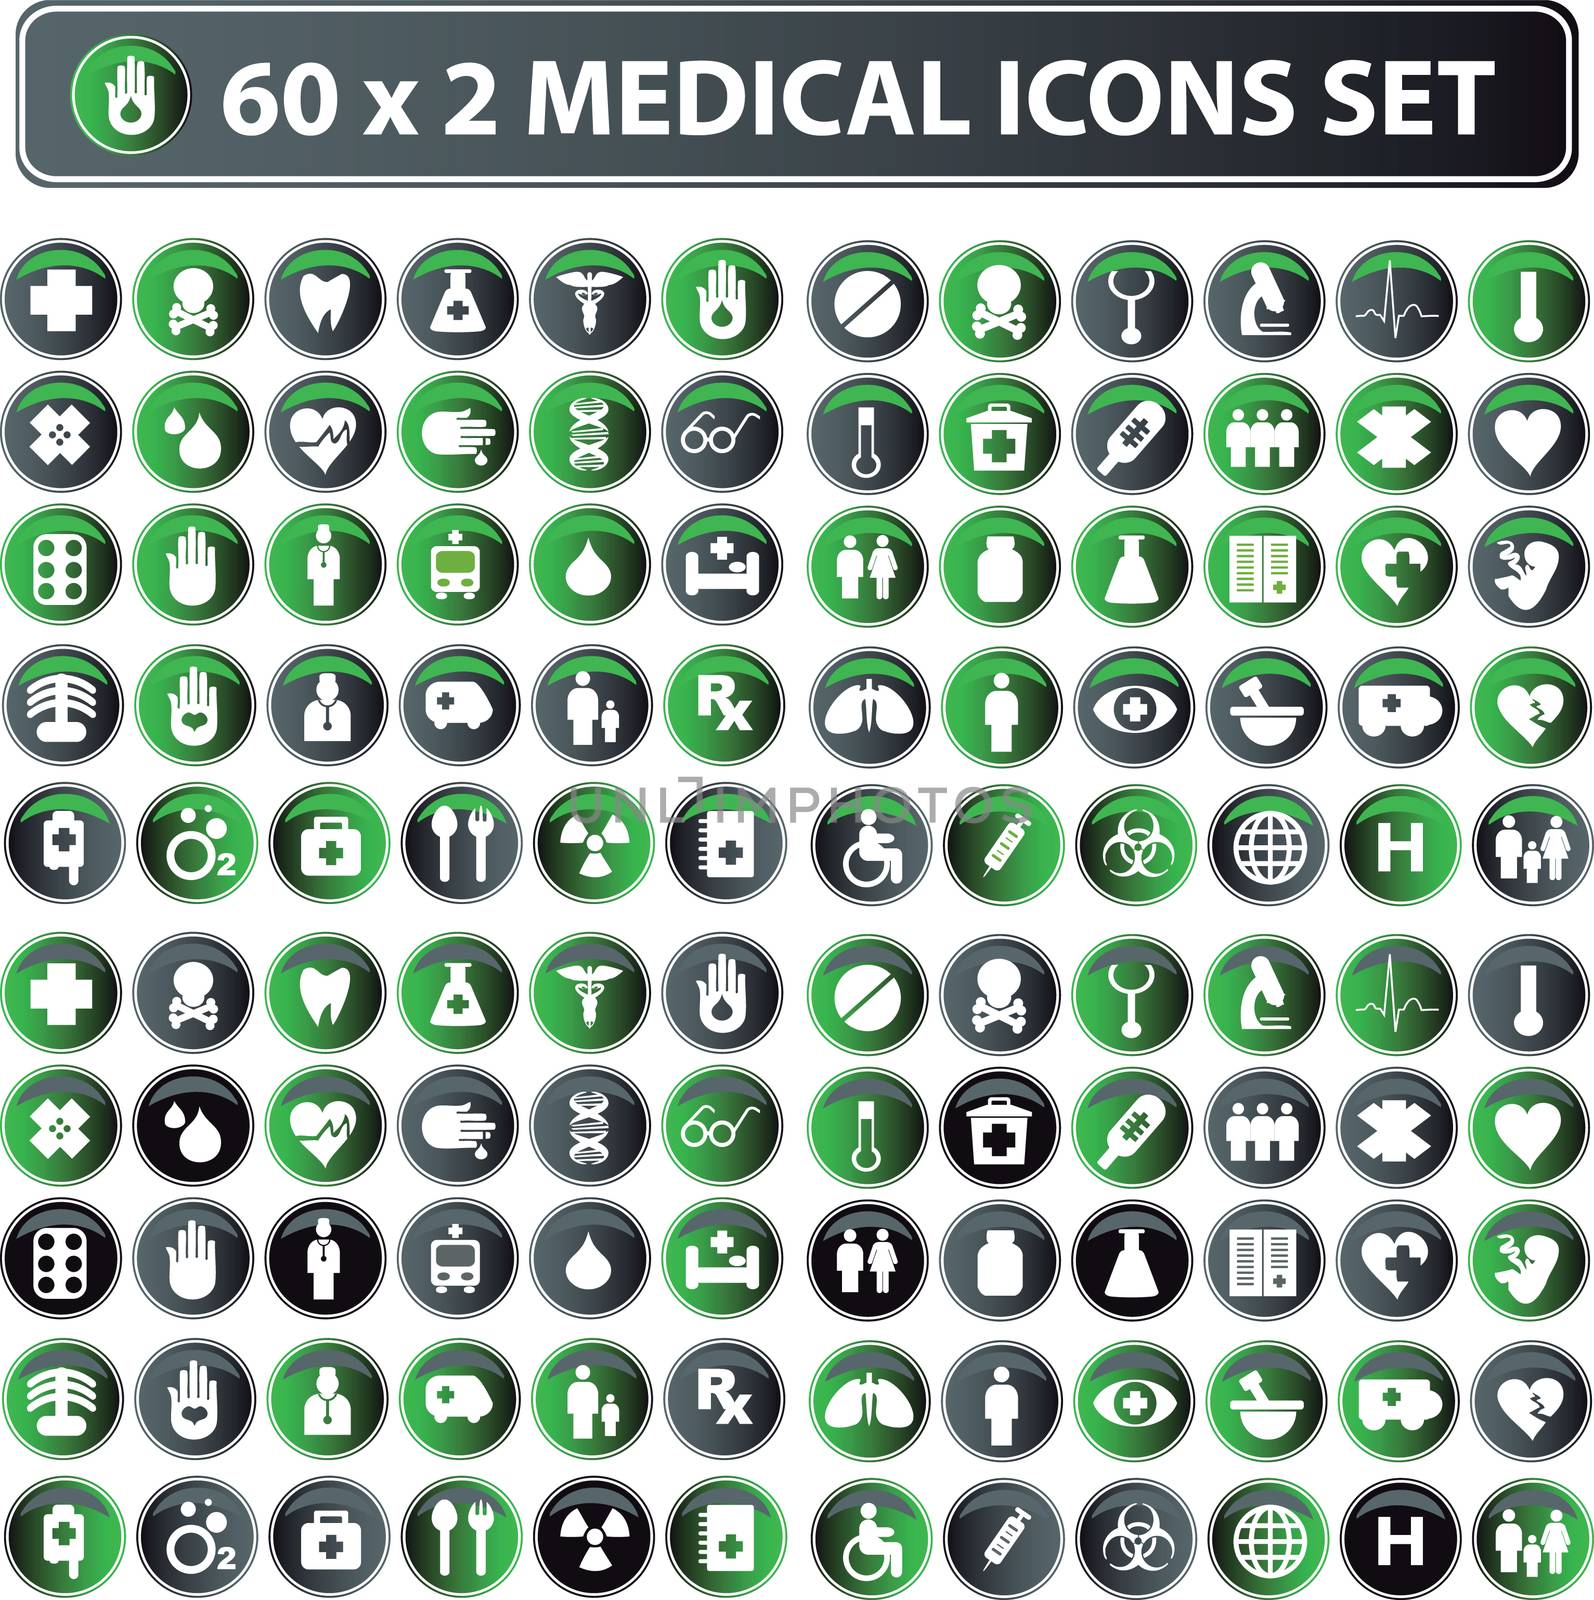 60x2 shiny Medical icons, button web by IconsJewelry